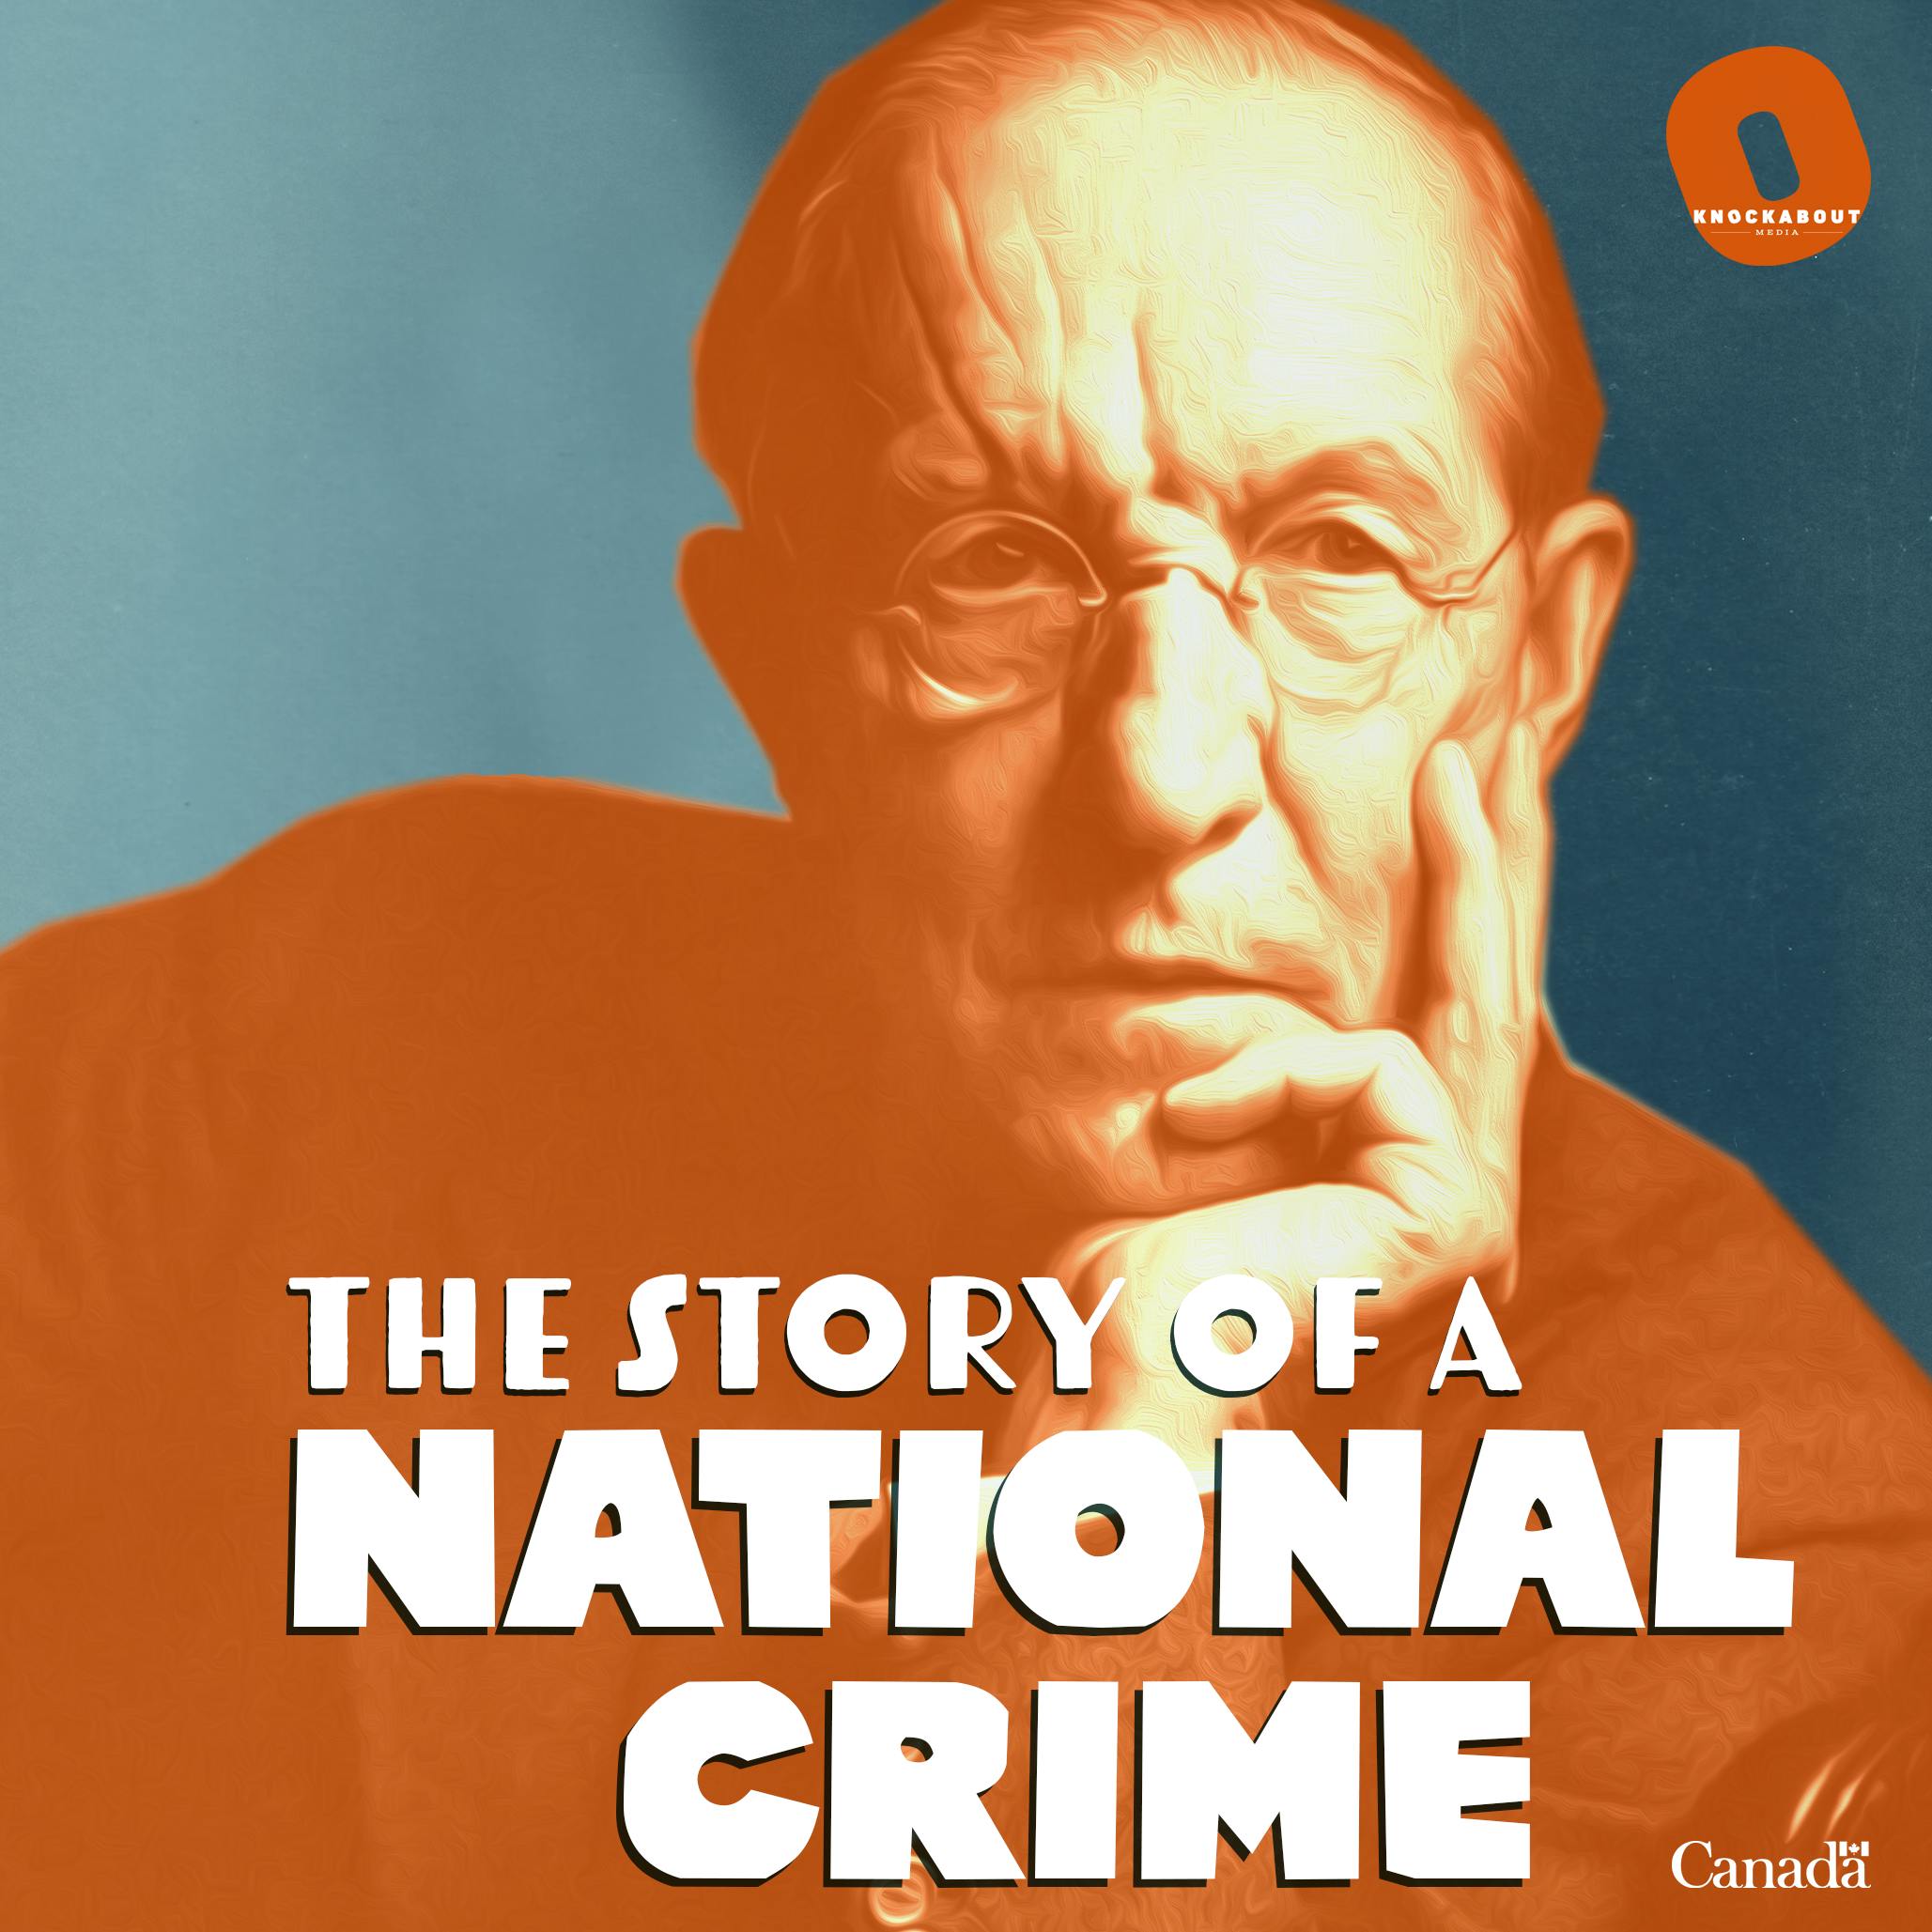 The Story Of A National Crime: ”A Condition Disgraceful to the Country”